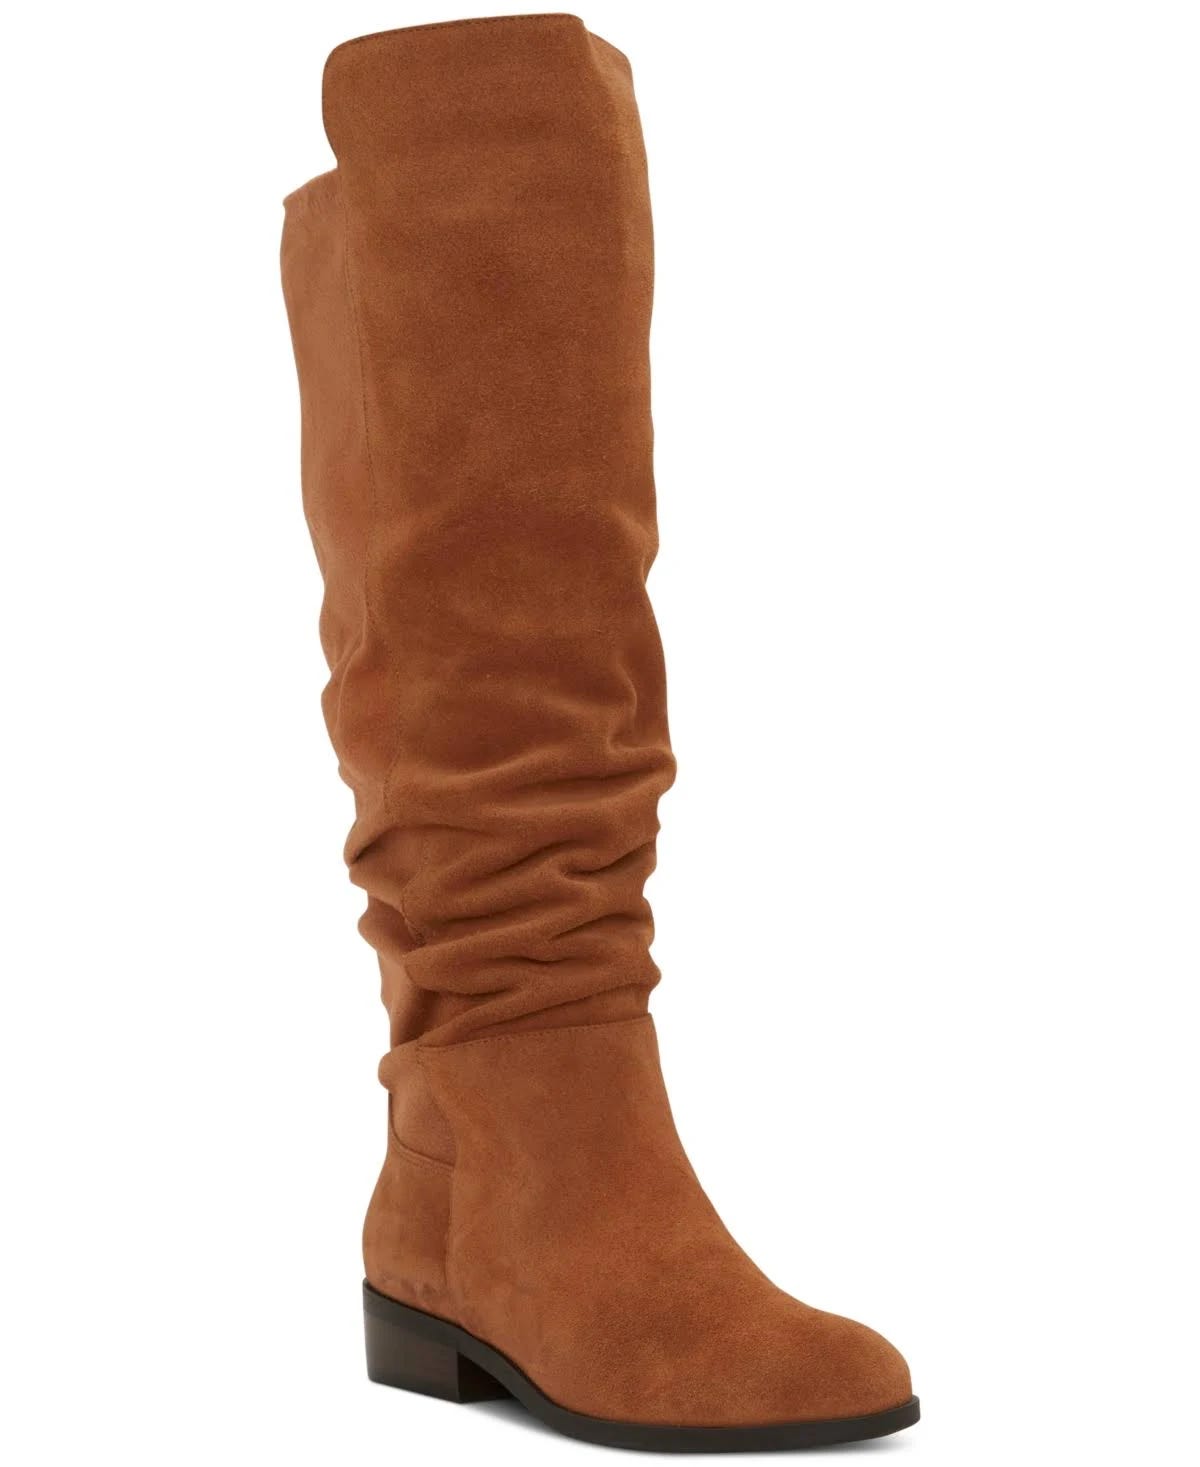 Stylish Tan Suede Knee-High Wide Calf Boots | Image